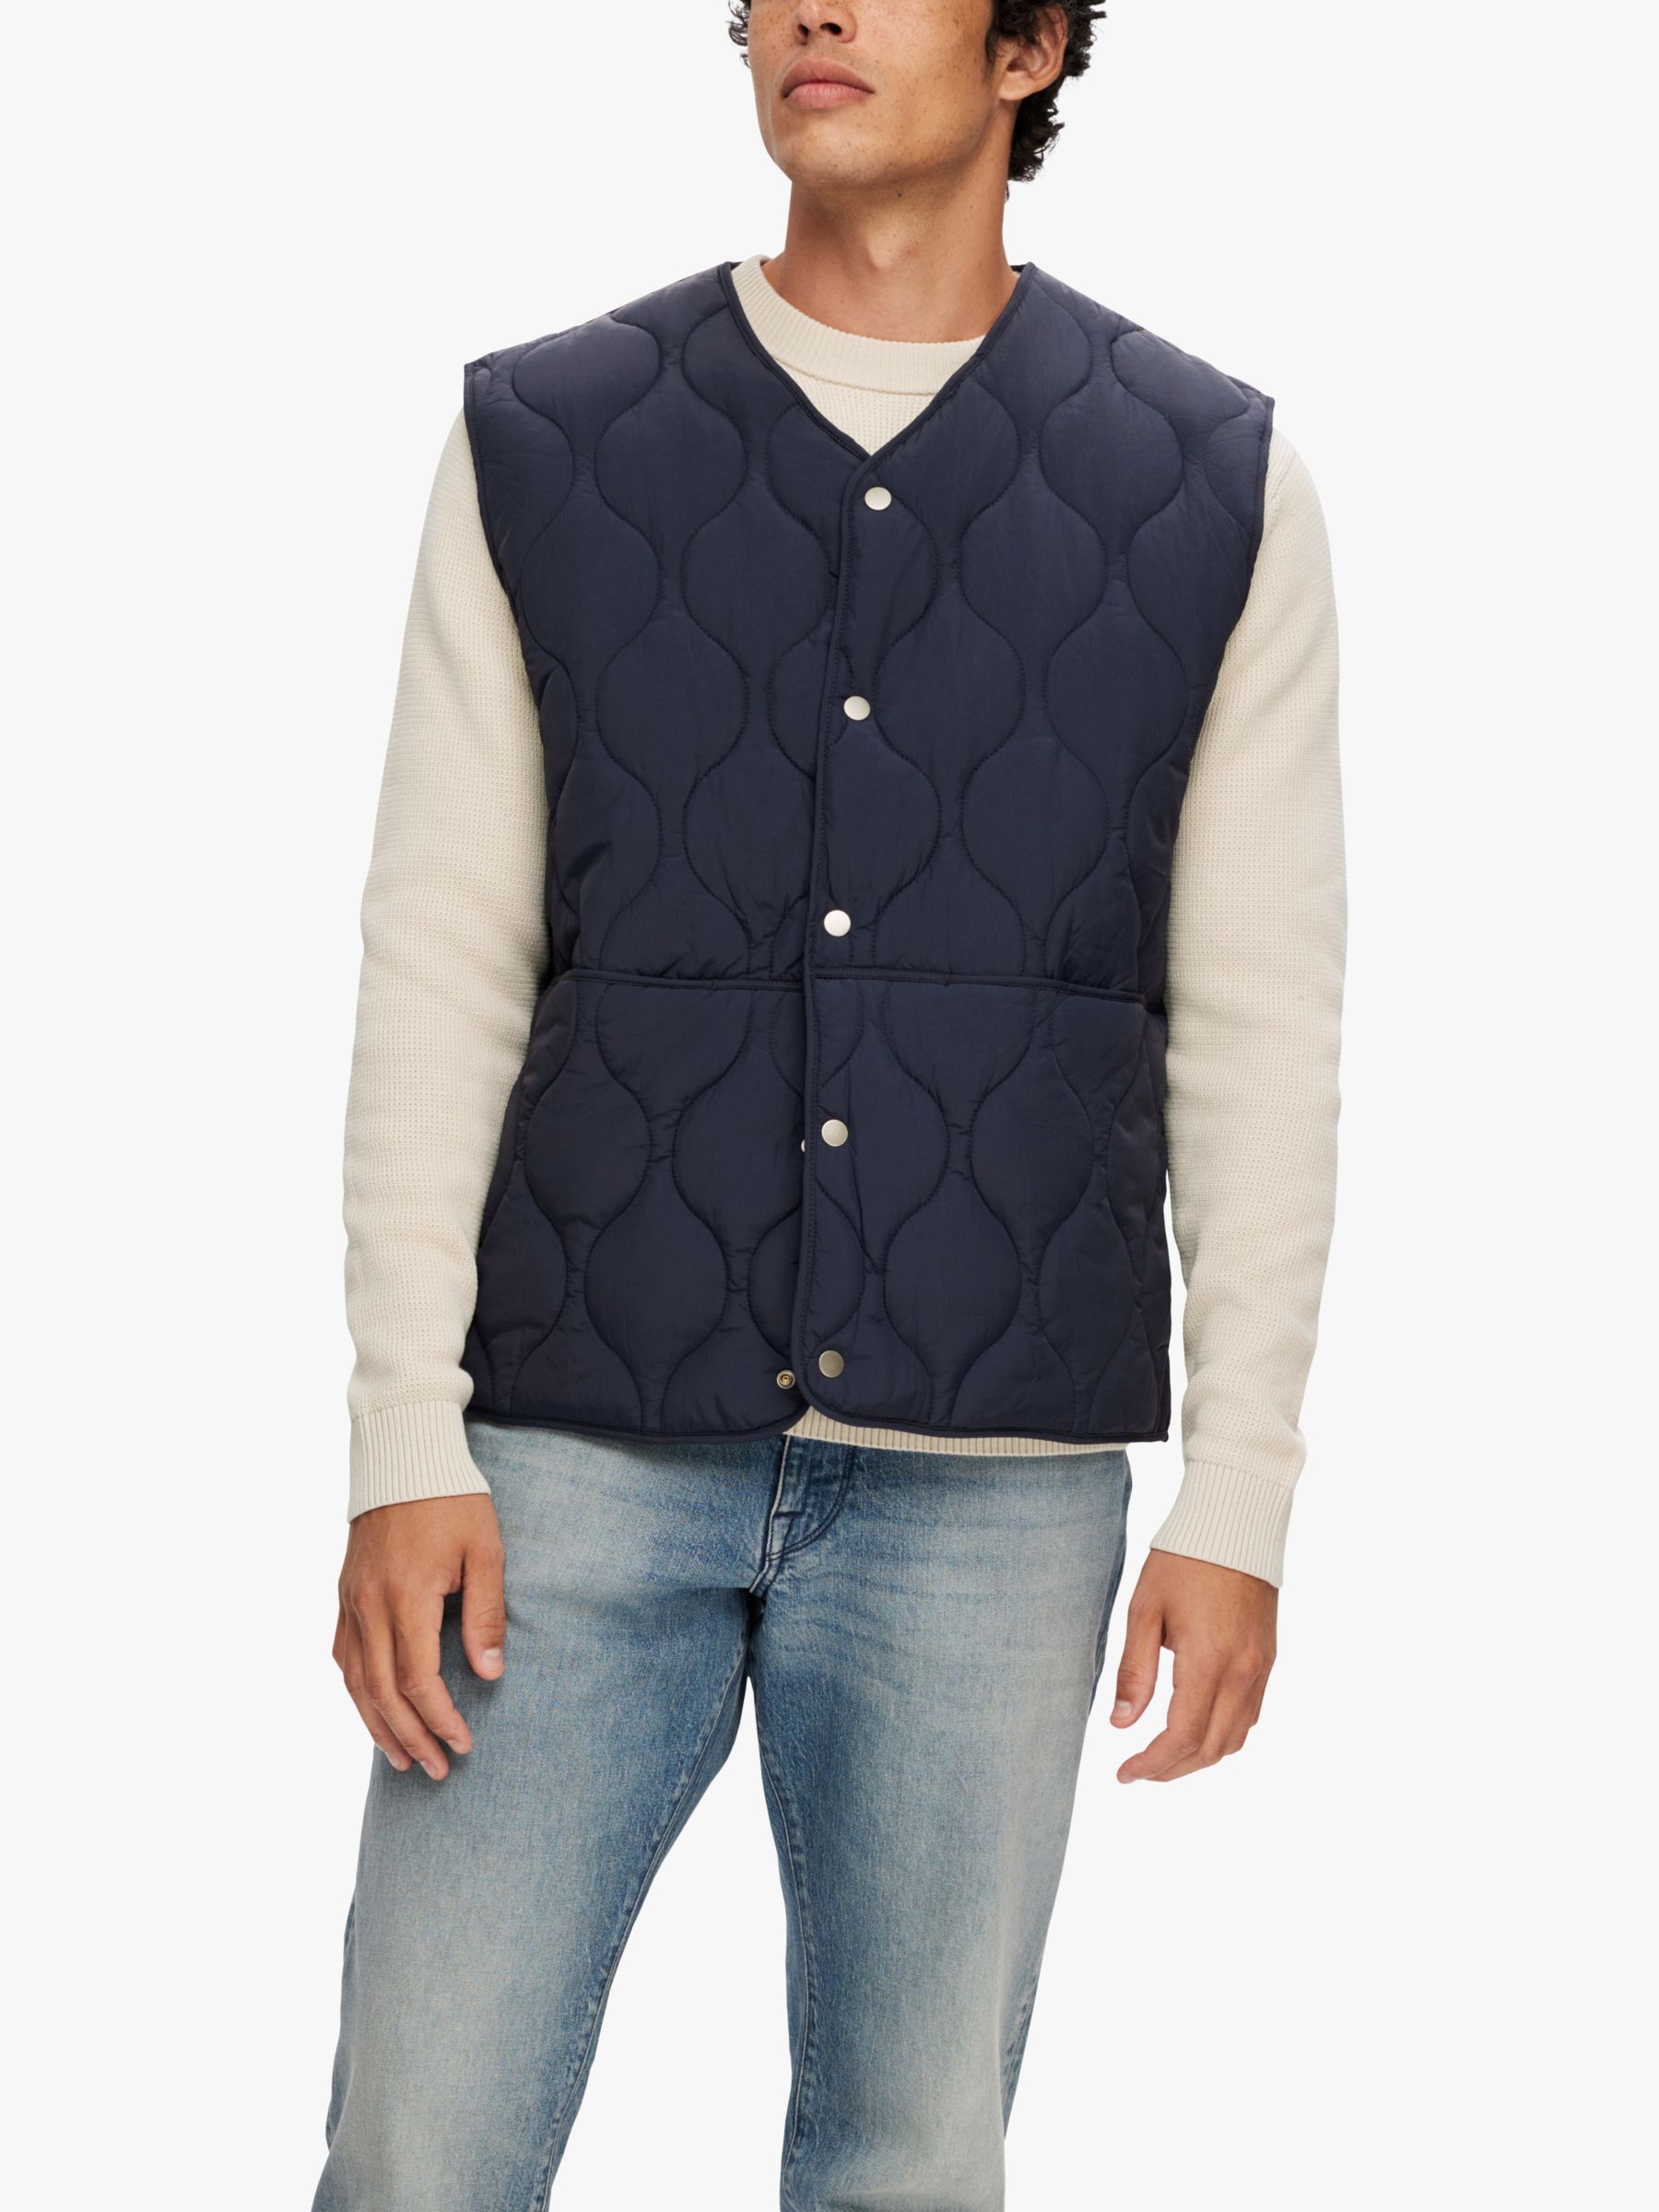 SELECTED HOMME Autumn Essential Gilet, Blue at John Lewis & Partners